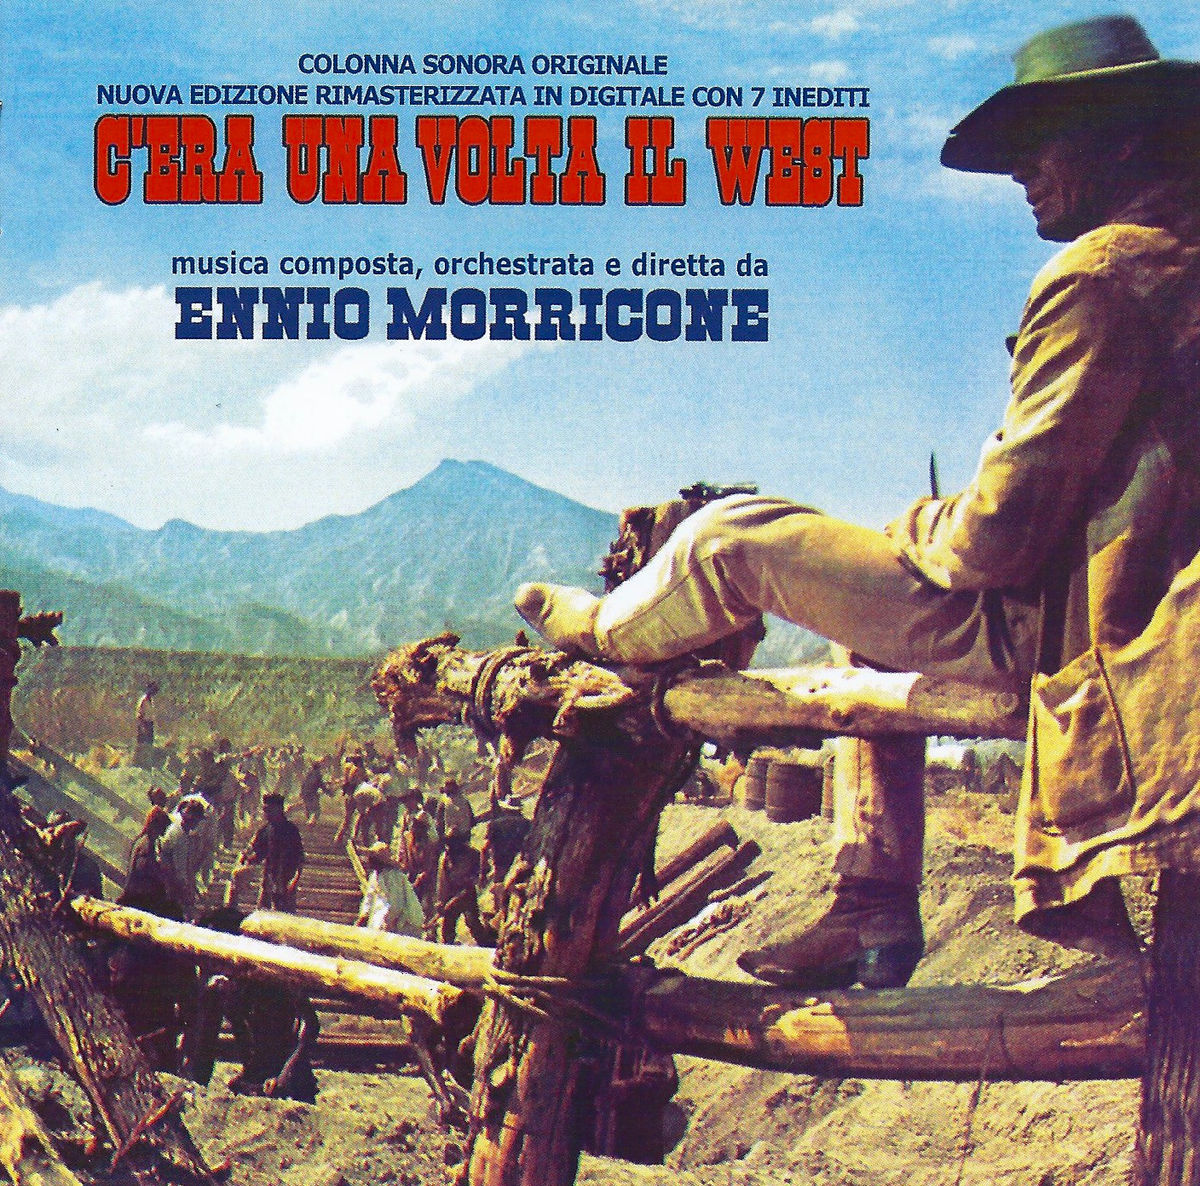 ENNIO MORRICONE AND THE SCORING OF “ONCE UPON A TIME IN THE WEST ...